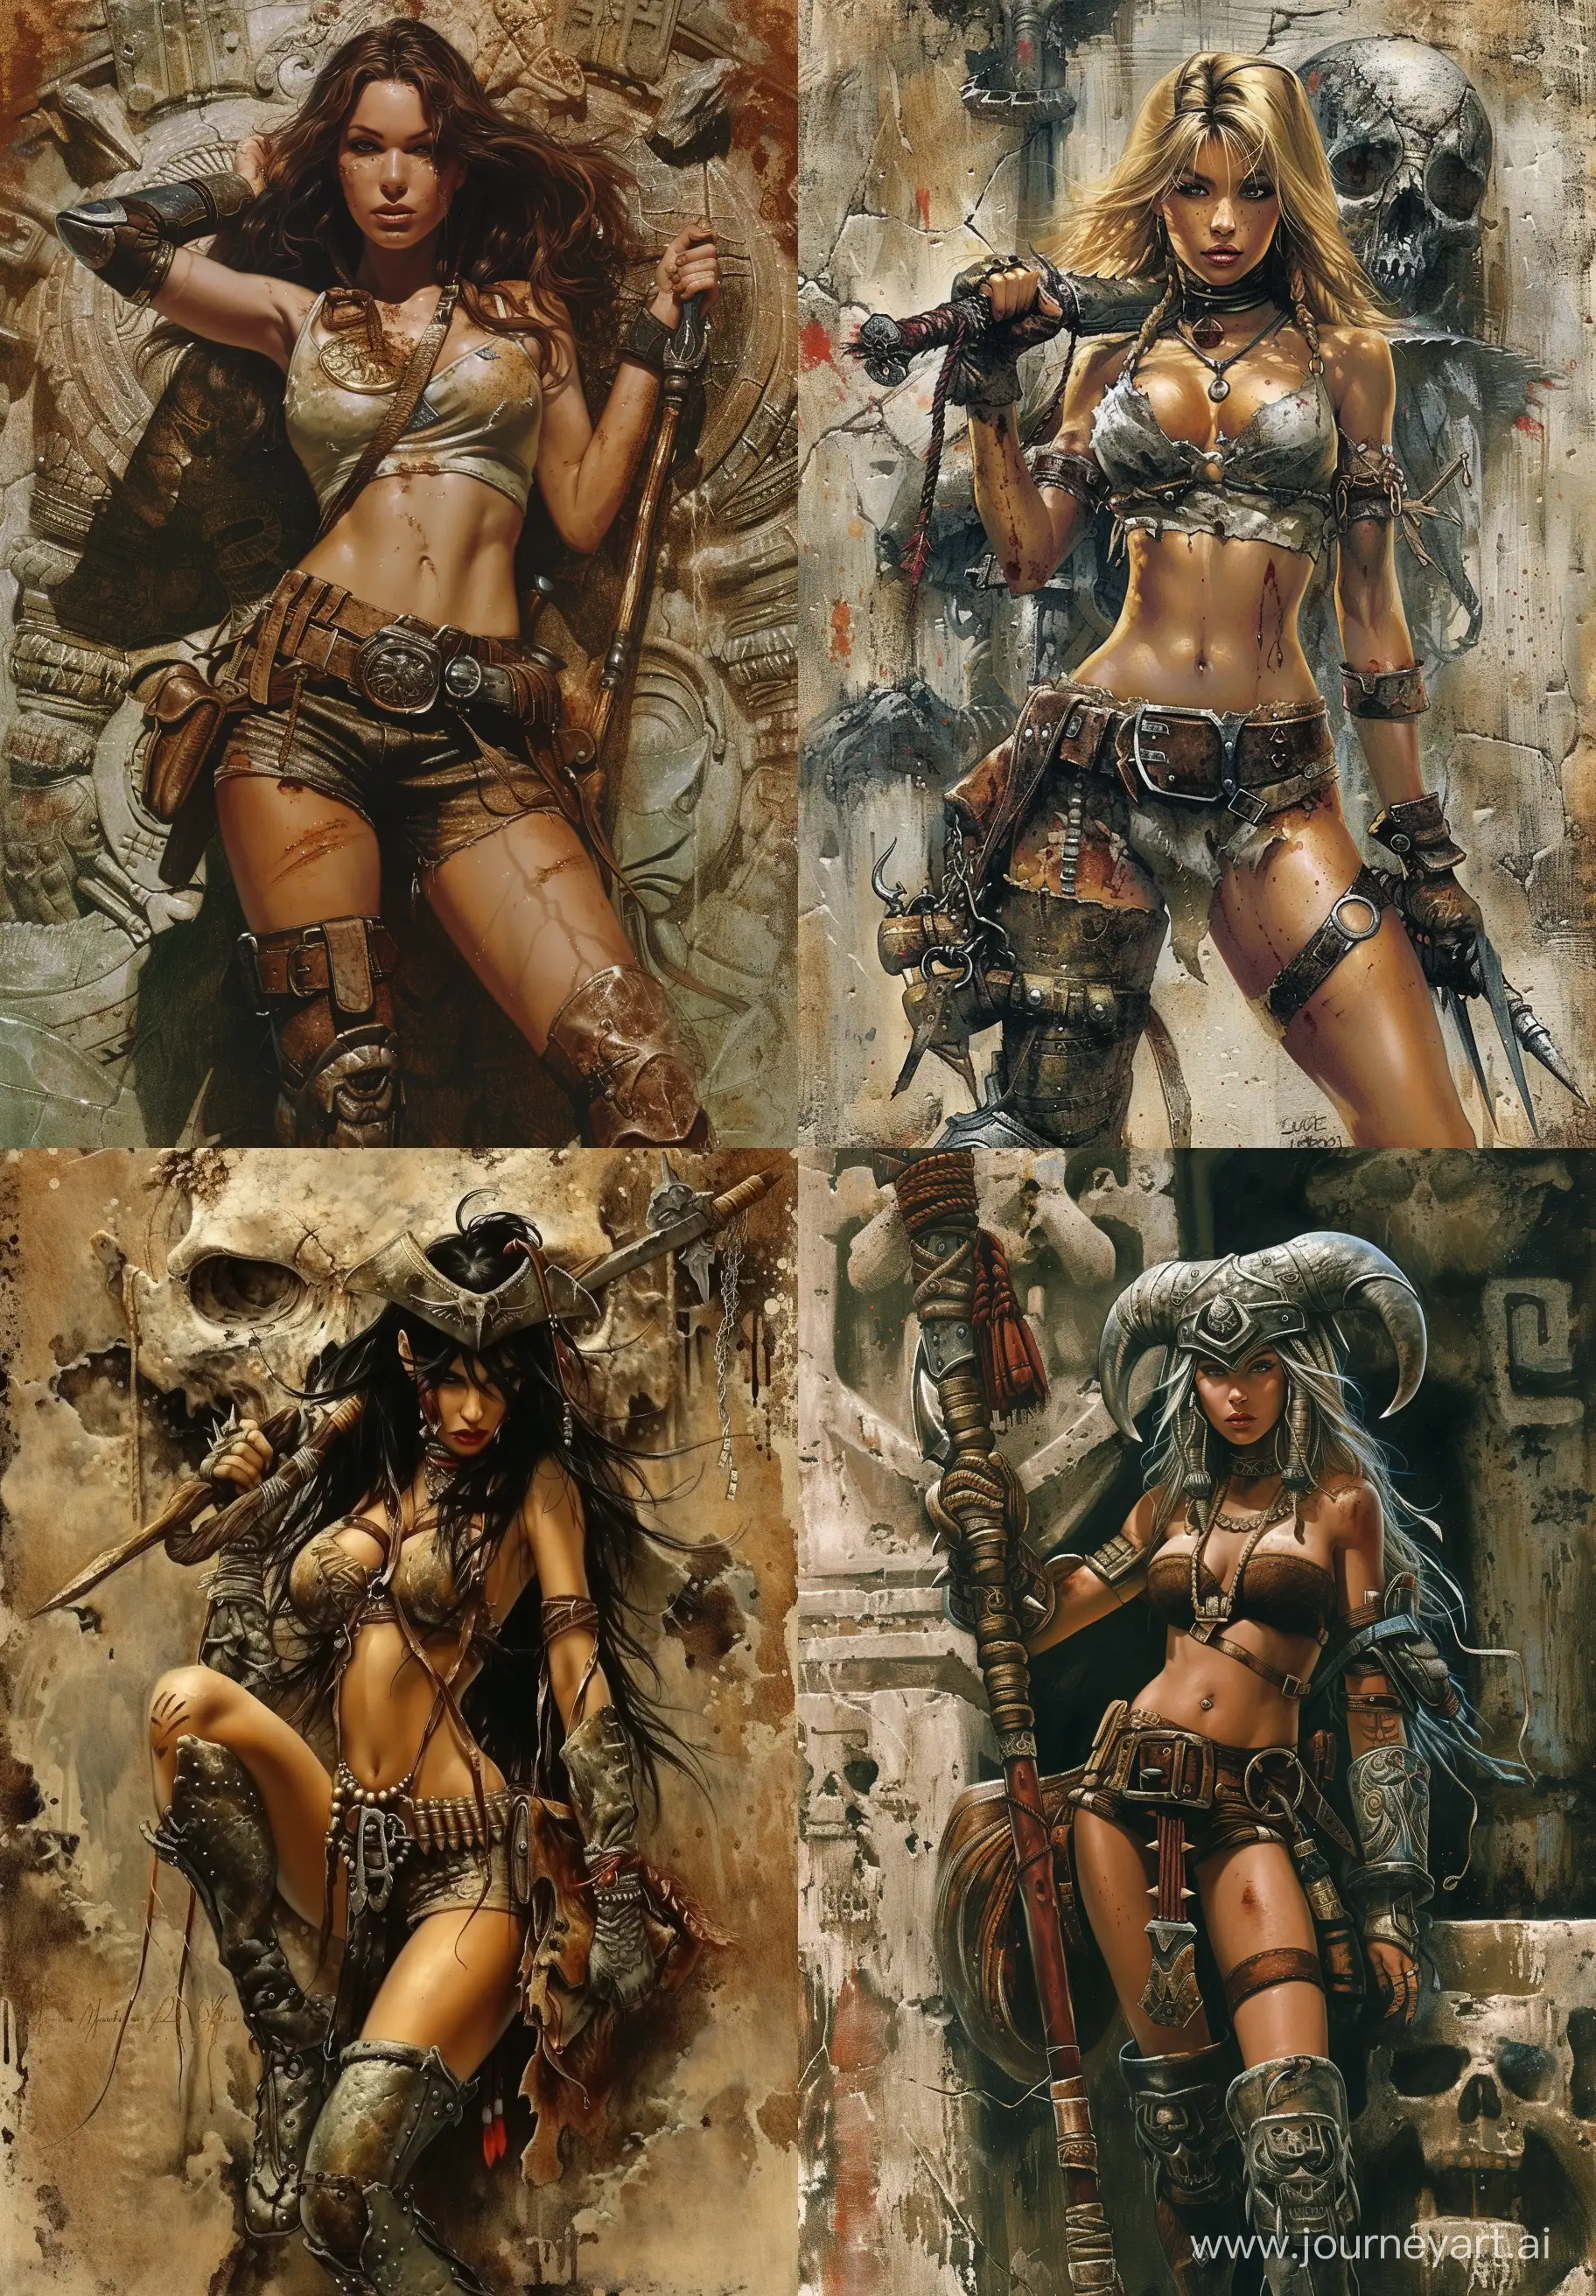 Piratic-Women-in-Exquisite-Armor-Fantasy-Warrior-with-Gold-and-Action